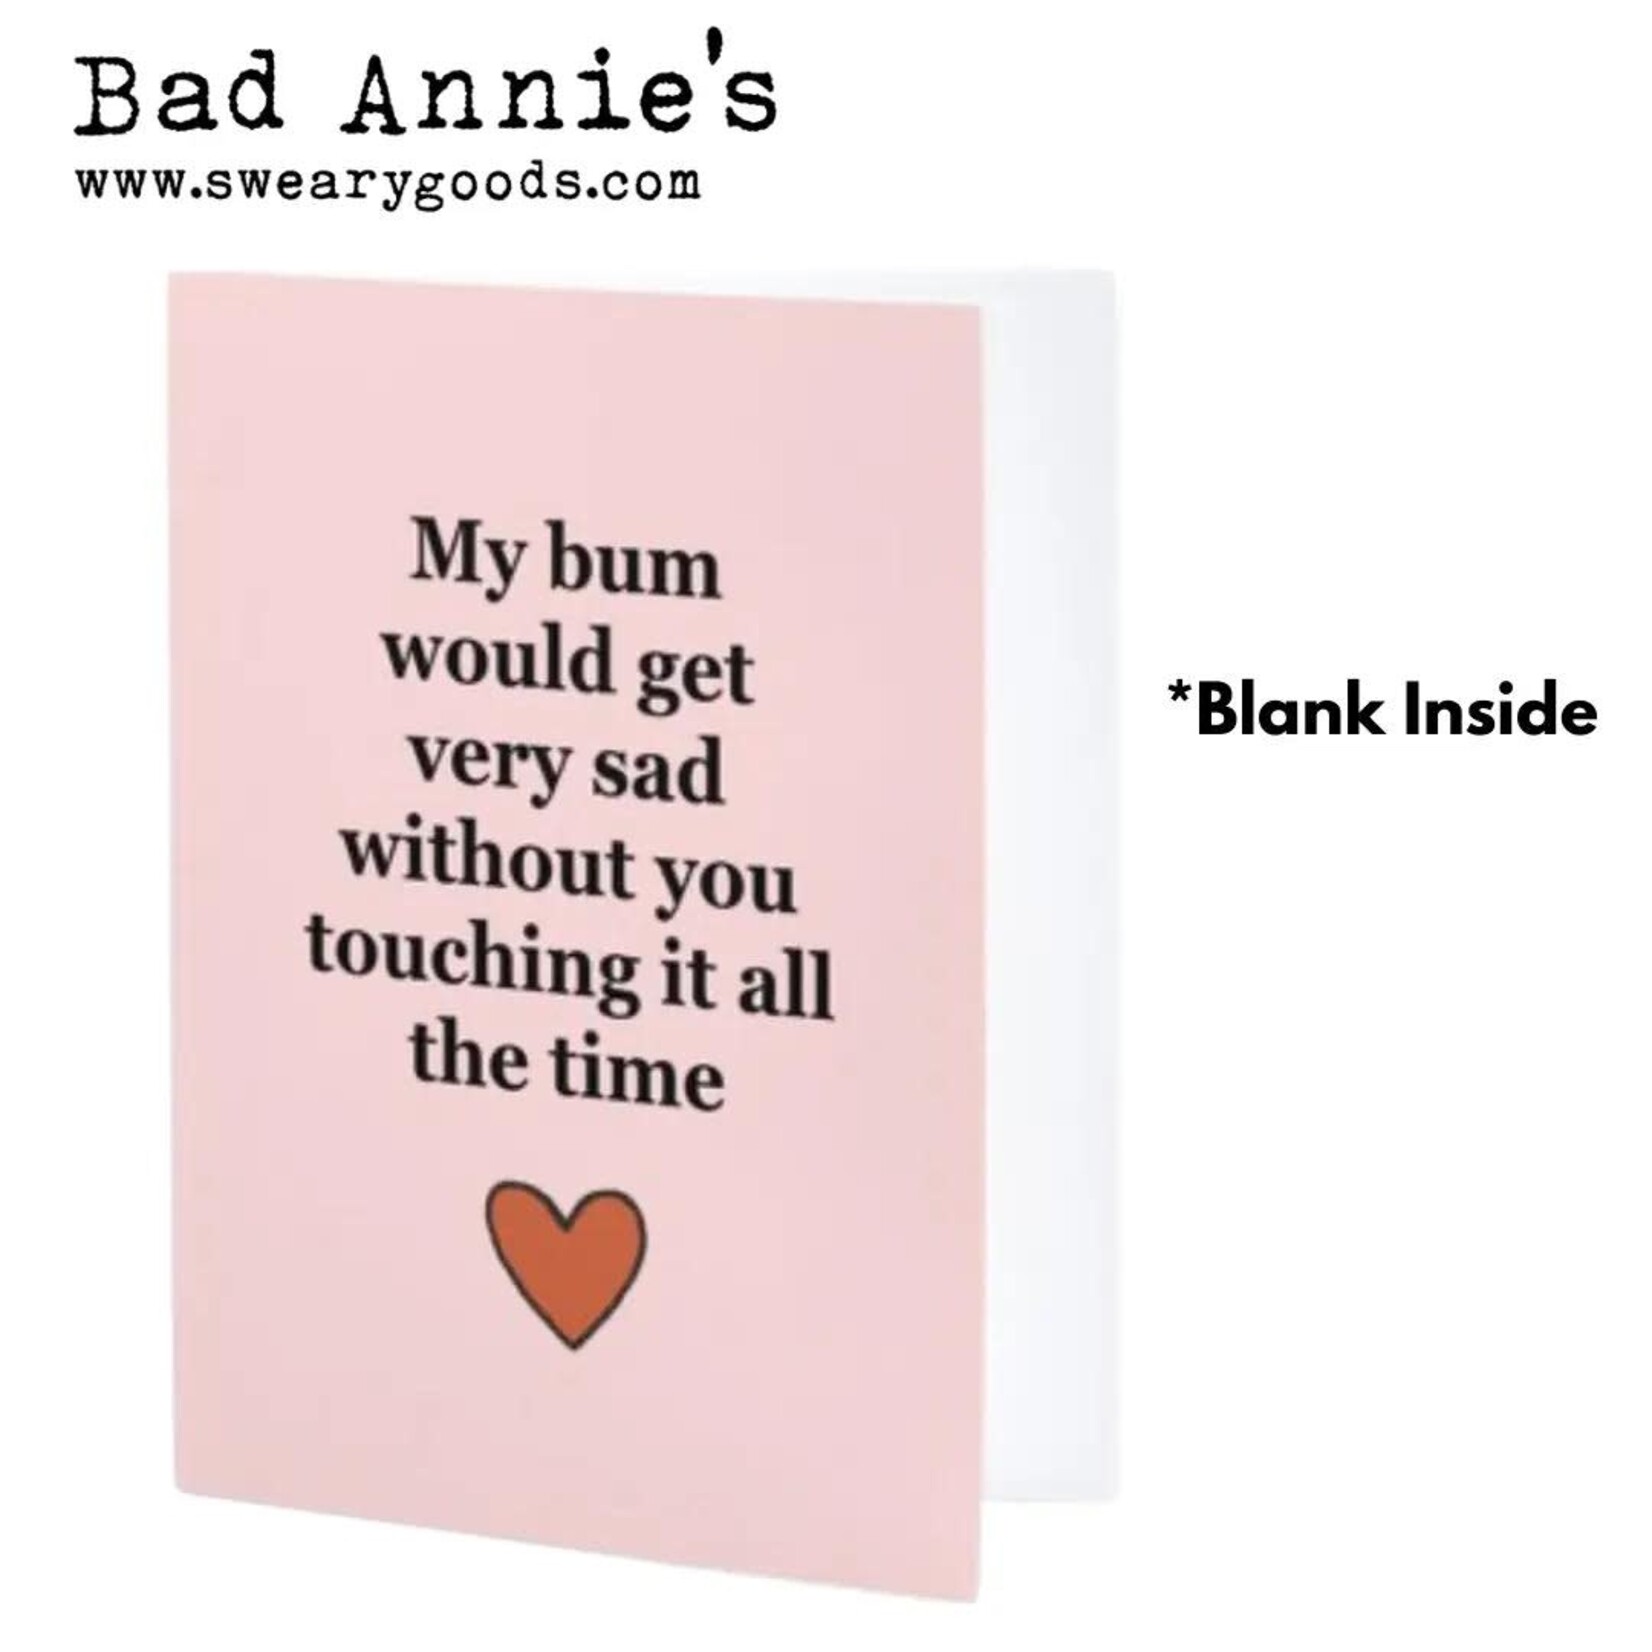 Bad Annie’s Card - My bum would get very sad without you touching it all the time